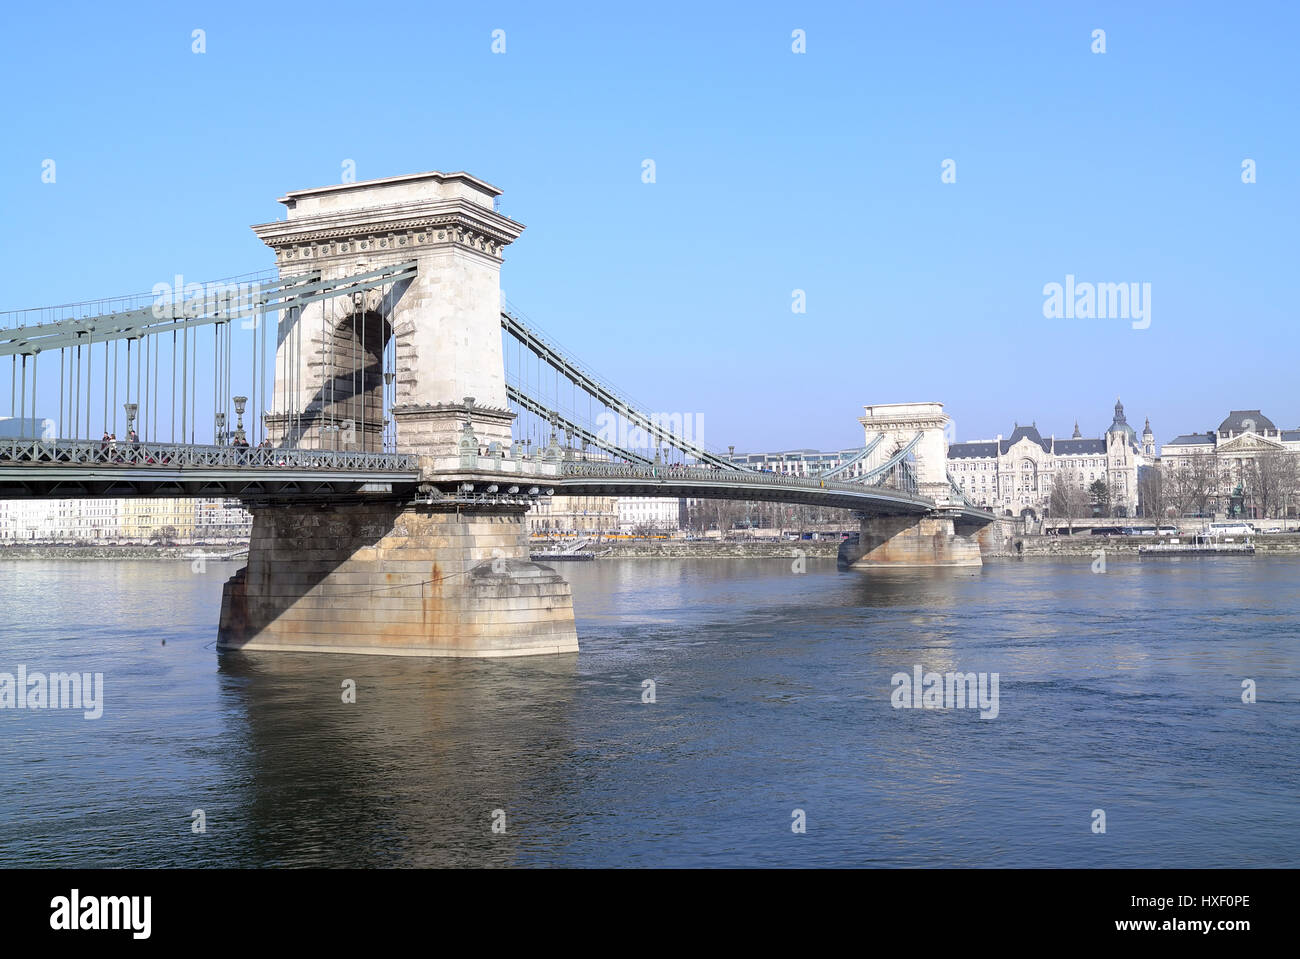 The Széchenyi Chain Bridge in Budapest, Hungary. The suspension bridge spans the River Danube between Buda and Pest and was designed by William Tierne Stock Photo